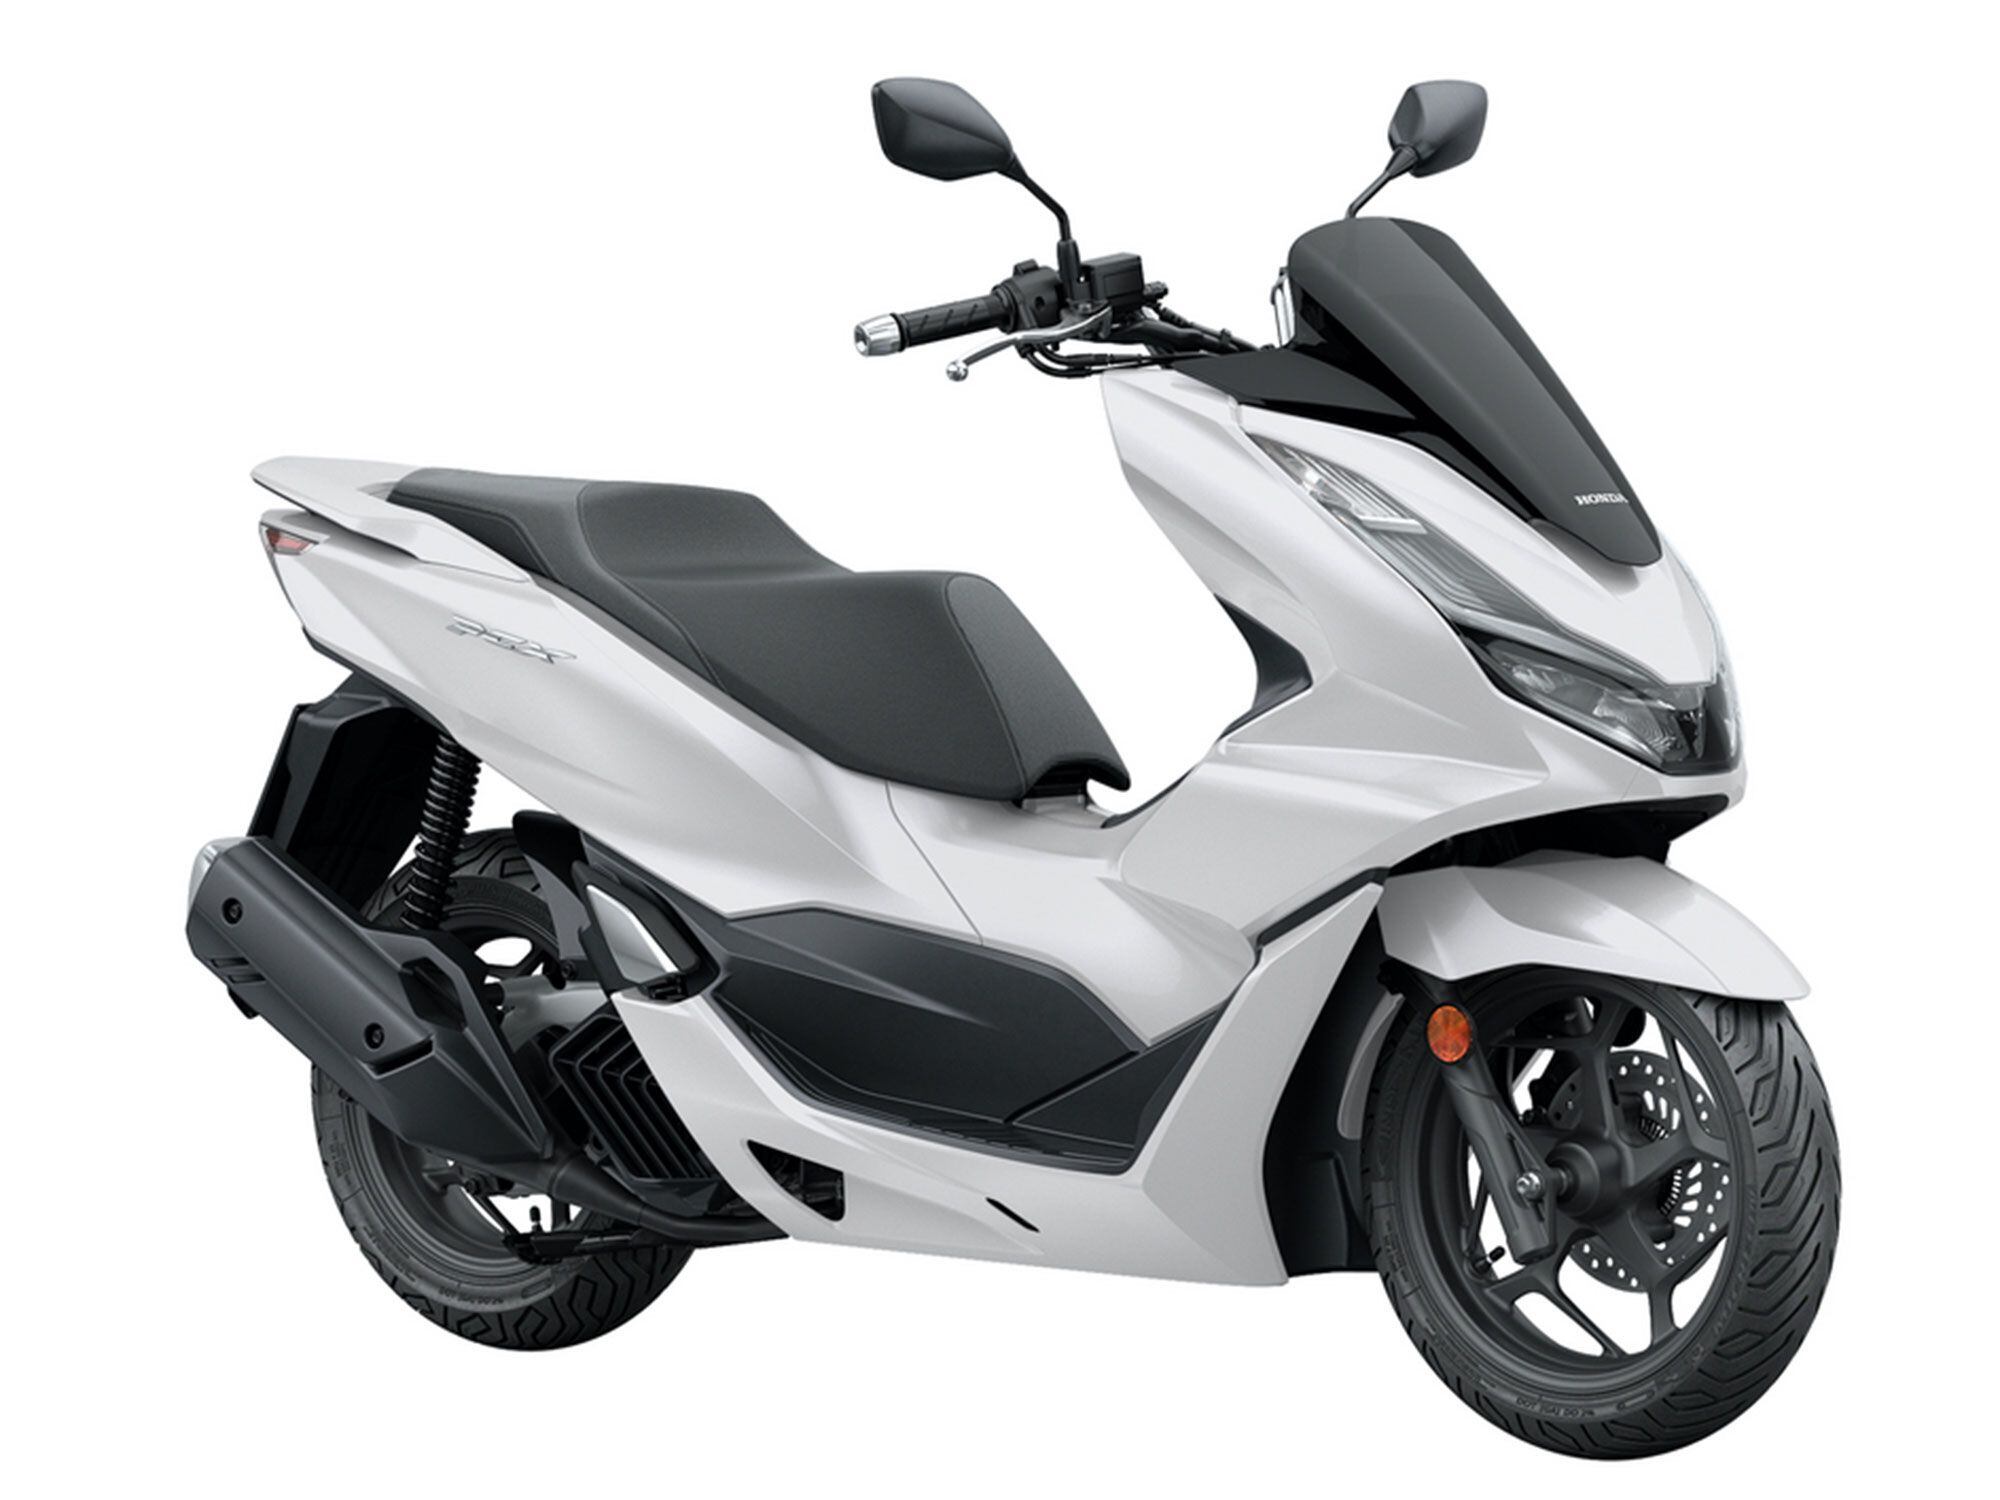 The PCX, the scooter formerly known as the PCX150, returns to Honda’s lineup for 2021 sporting a new larger and more efficient four-valve engine.